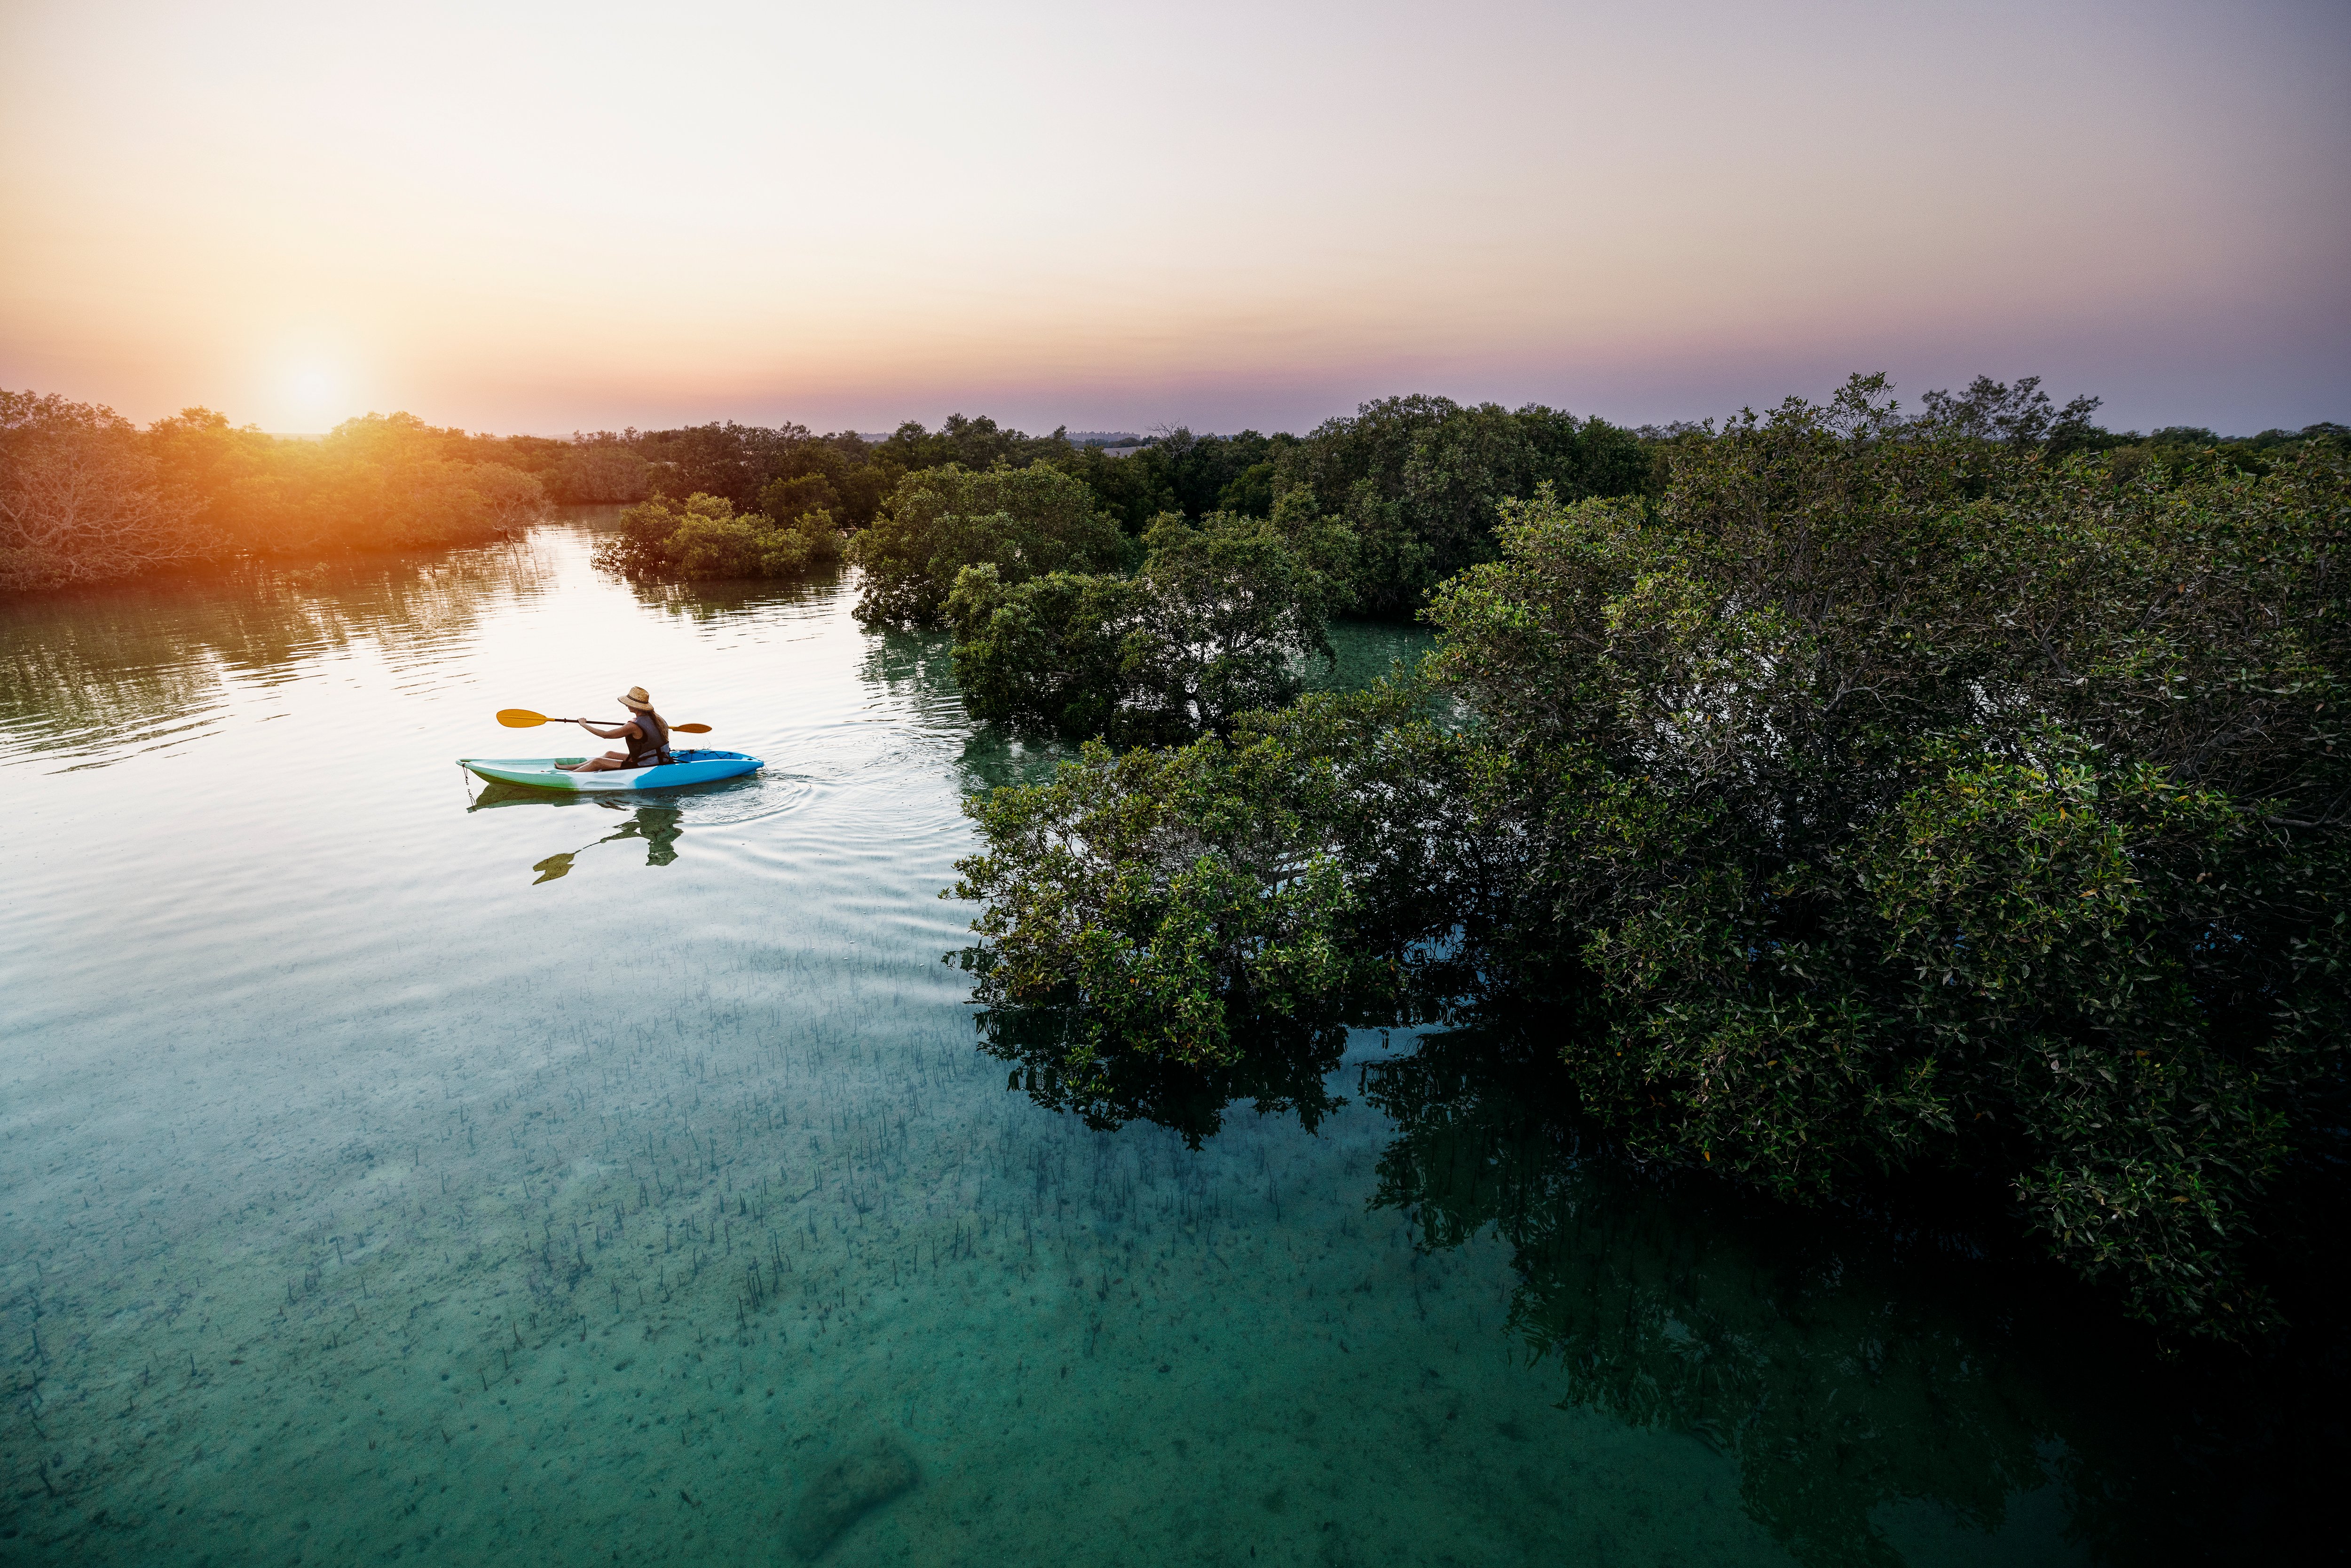 Venture into the Mangroves